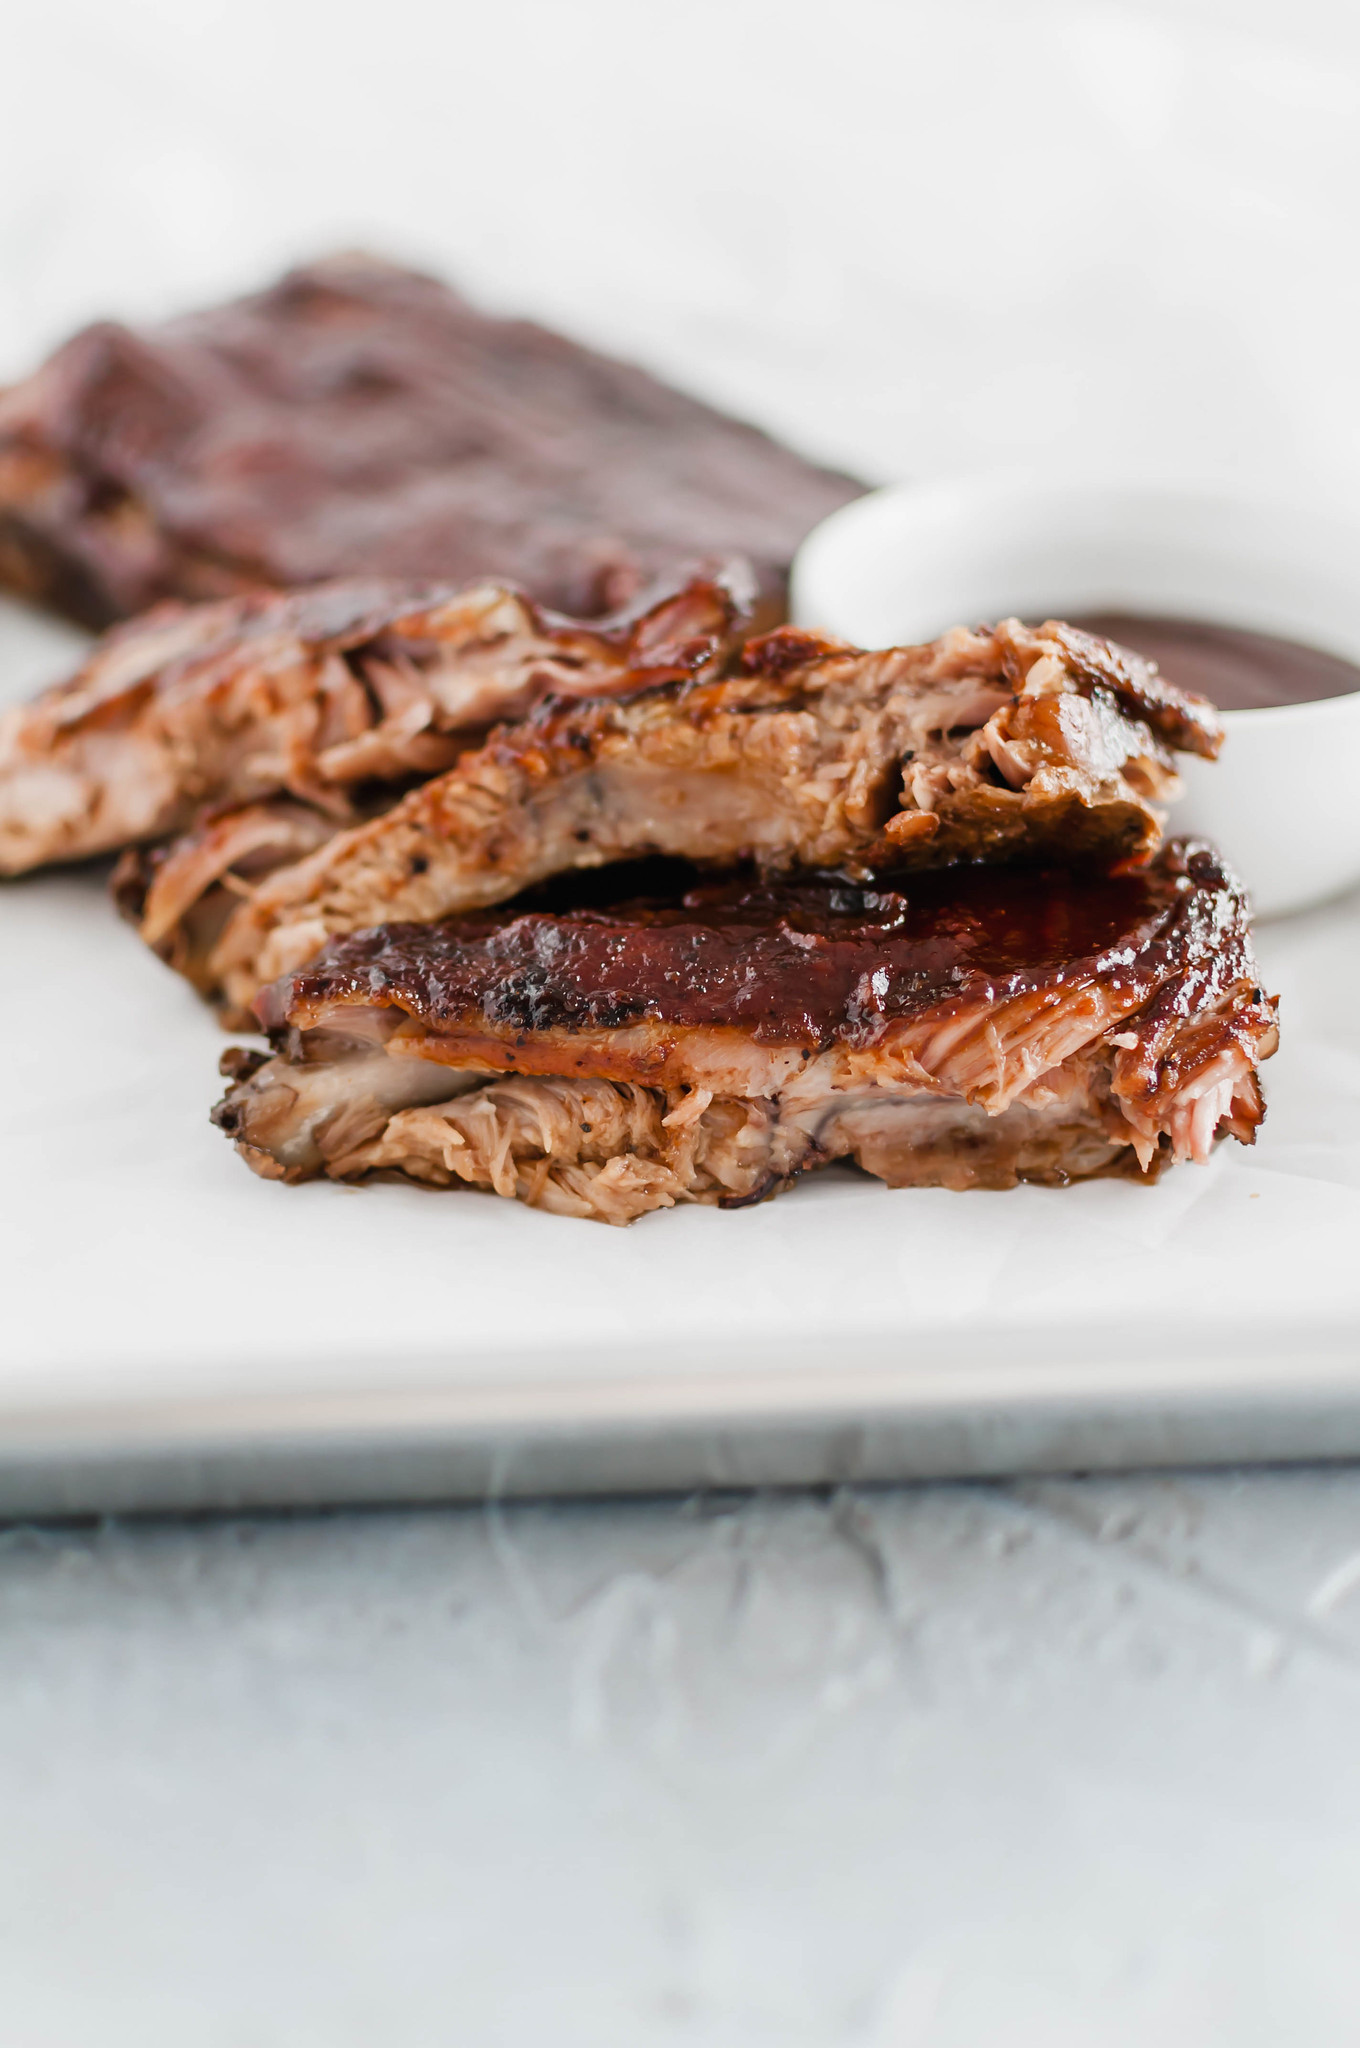 These Oven Baked Ribs are the ultimate in comfort. So simple and unbelievably tender. Rubbed with a delicious, rich coffee rub, baked then slathered in bbq sauce.